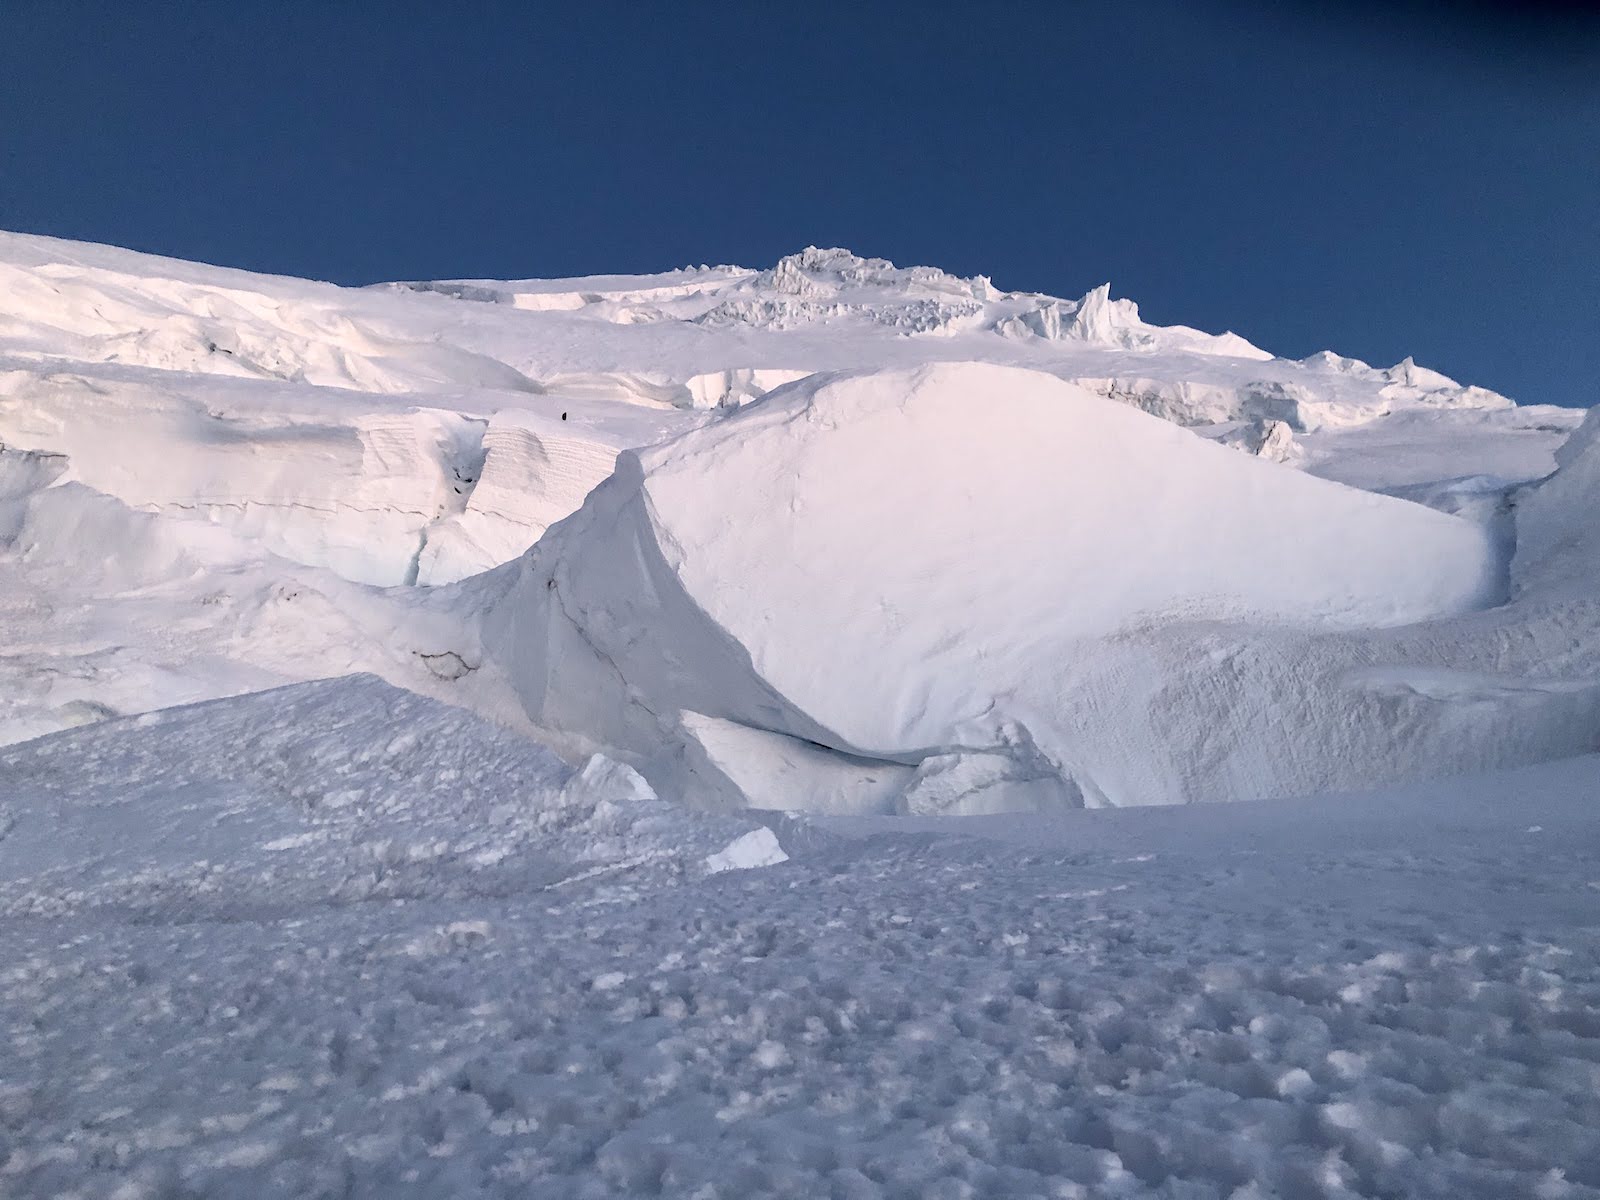 Part of the Ingraham glacier on Mount Rainier with a distant climber